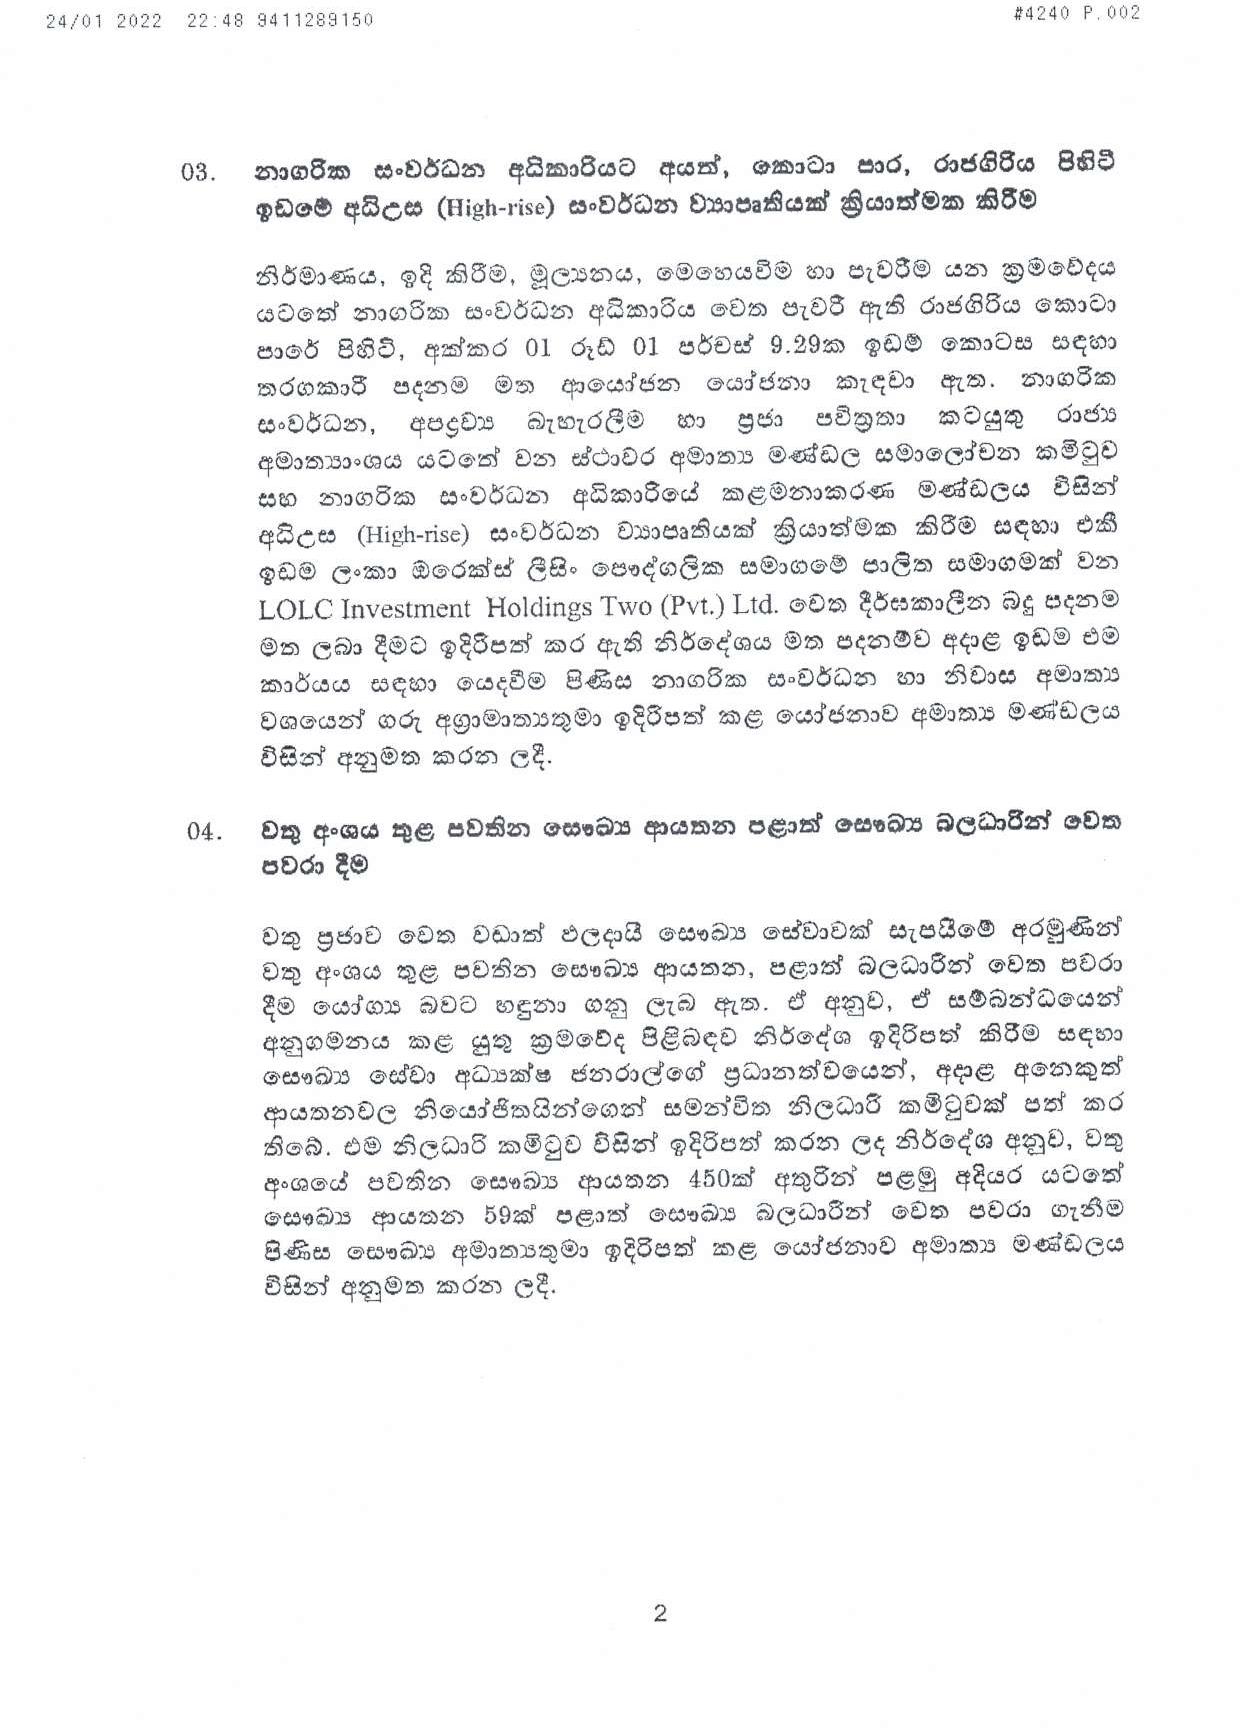 Cabinet Decision on 24.01.2022 page 002